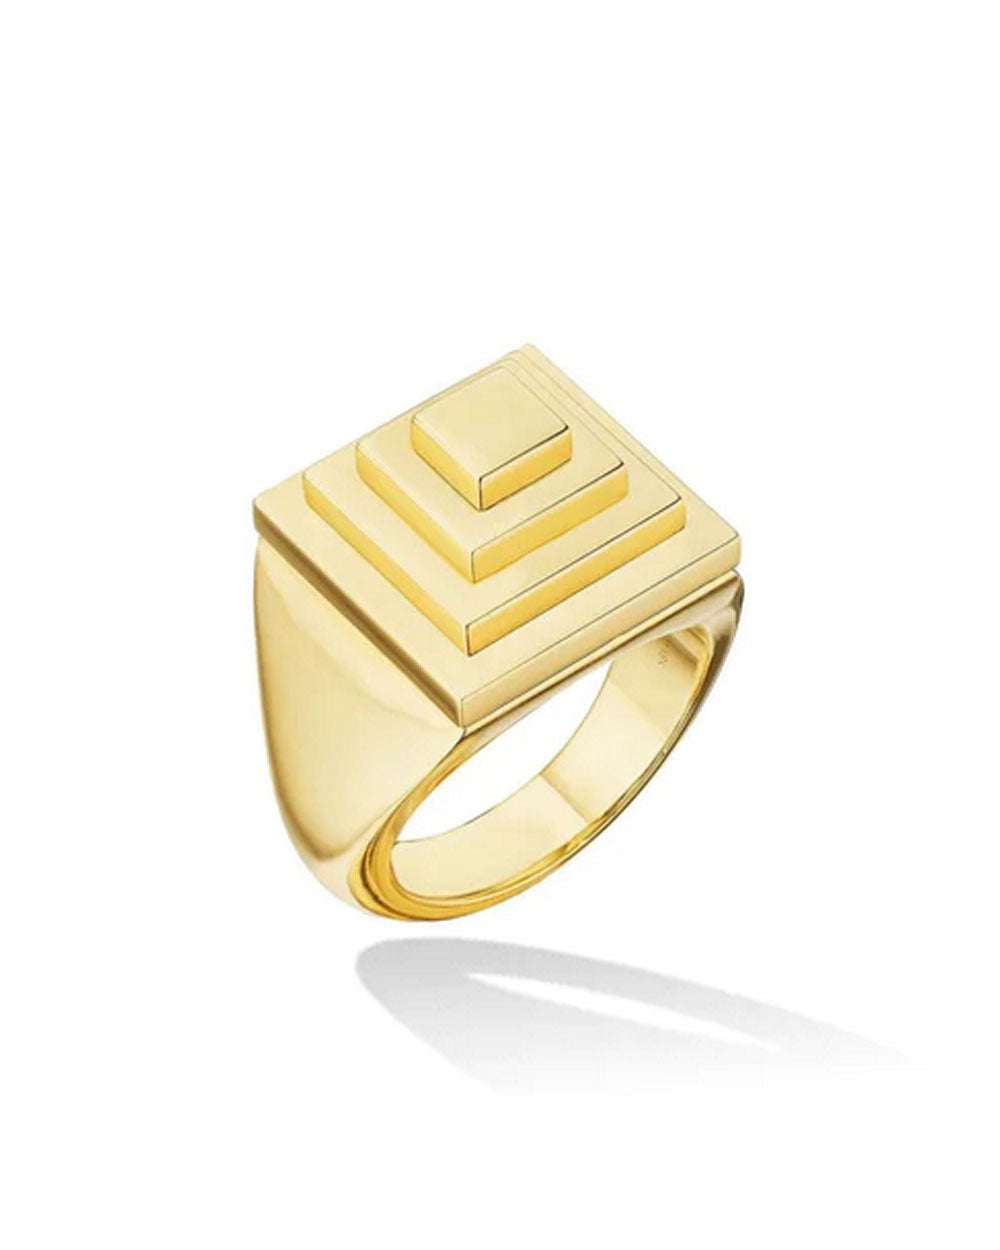 Foundation Signet Pinky Ring